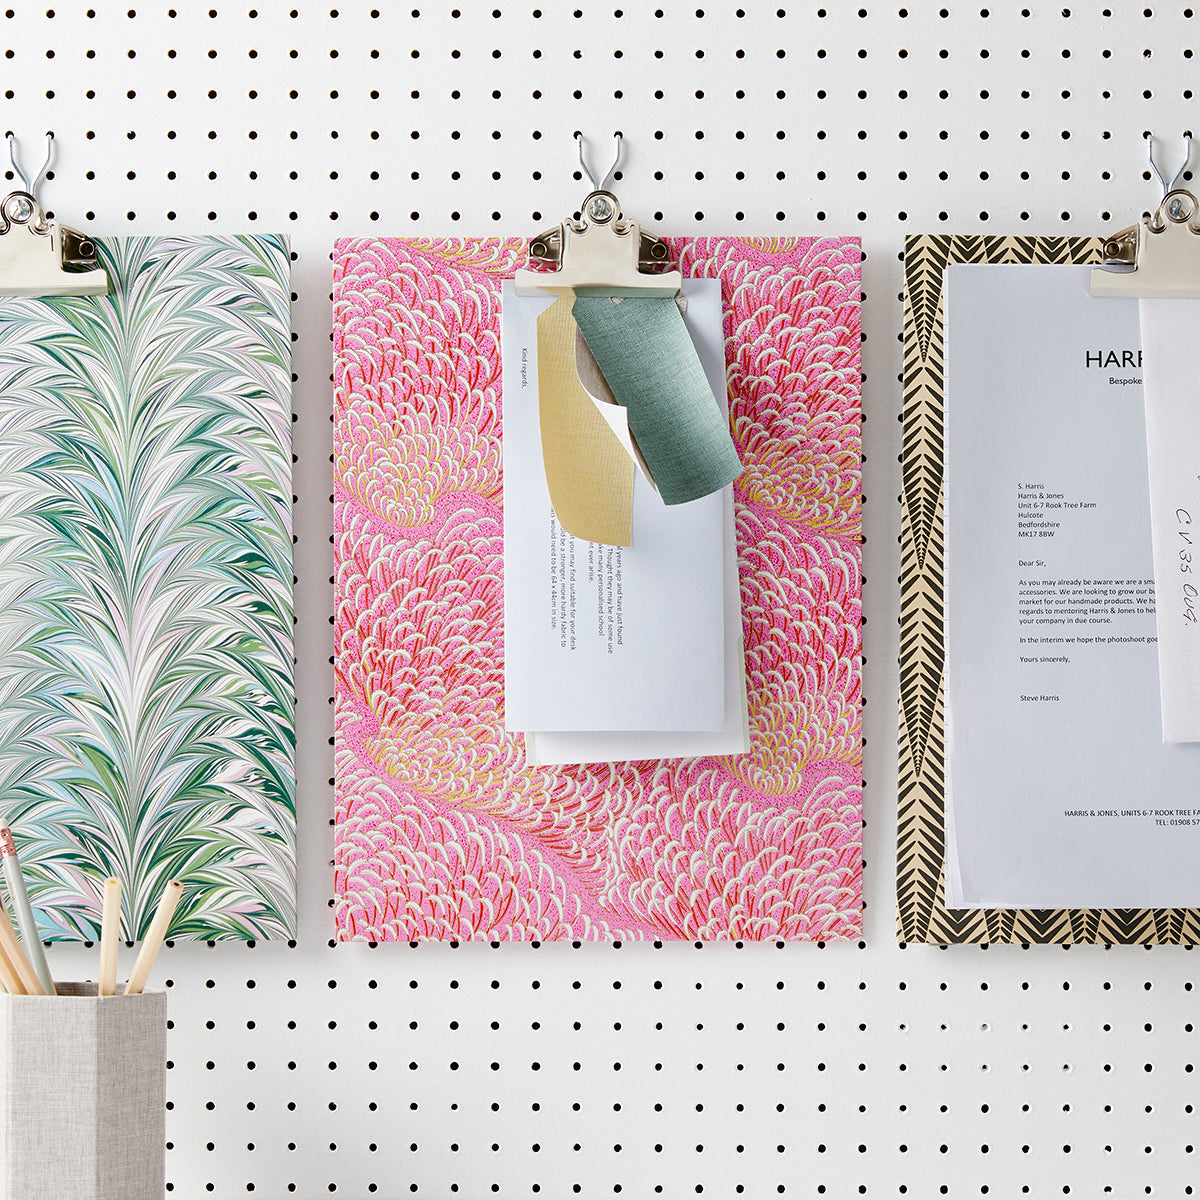 Patterned Clipboards